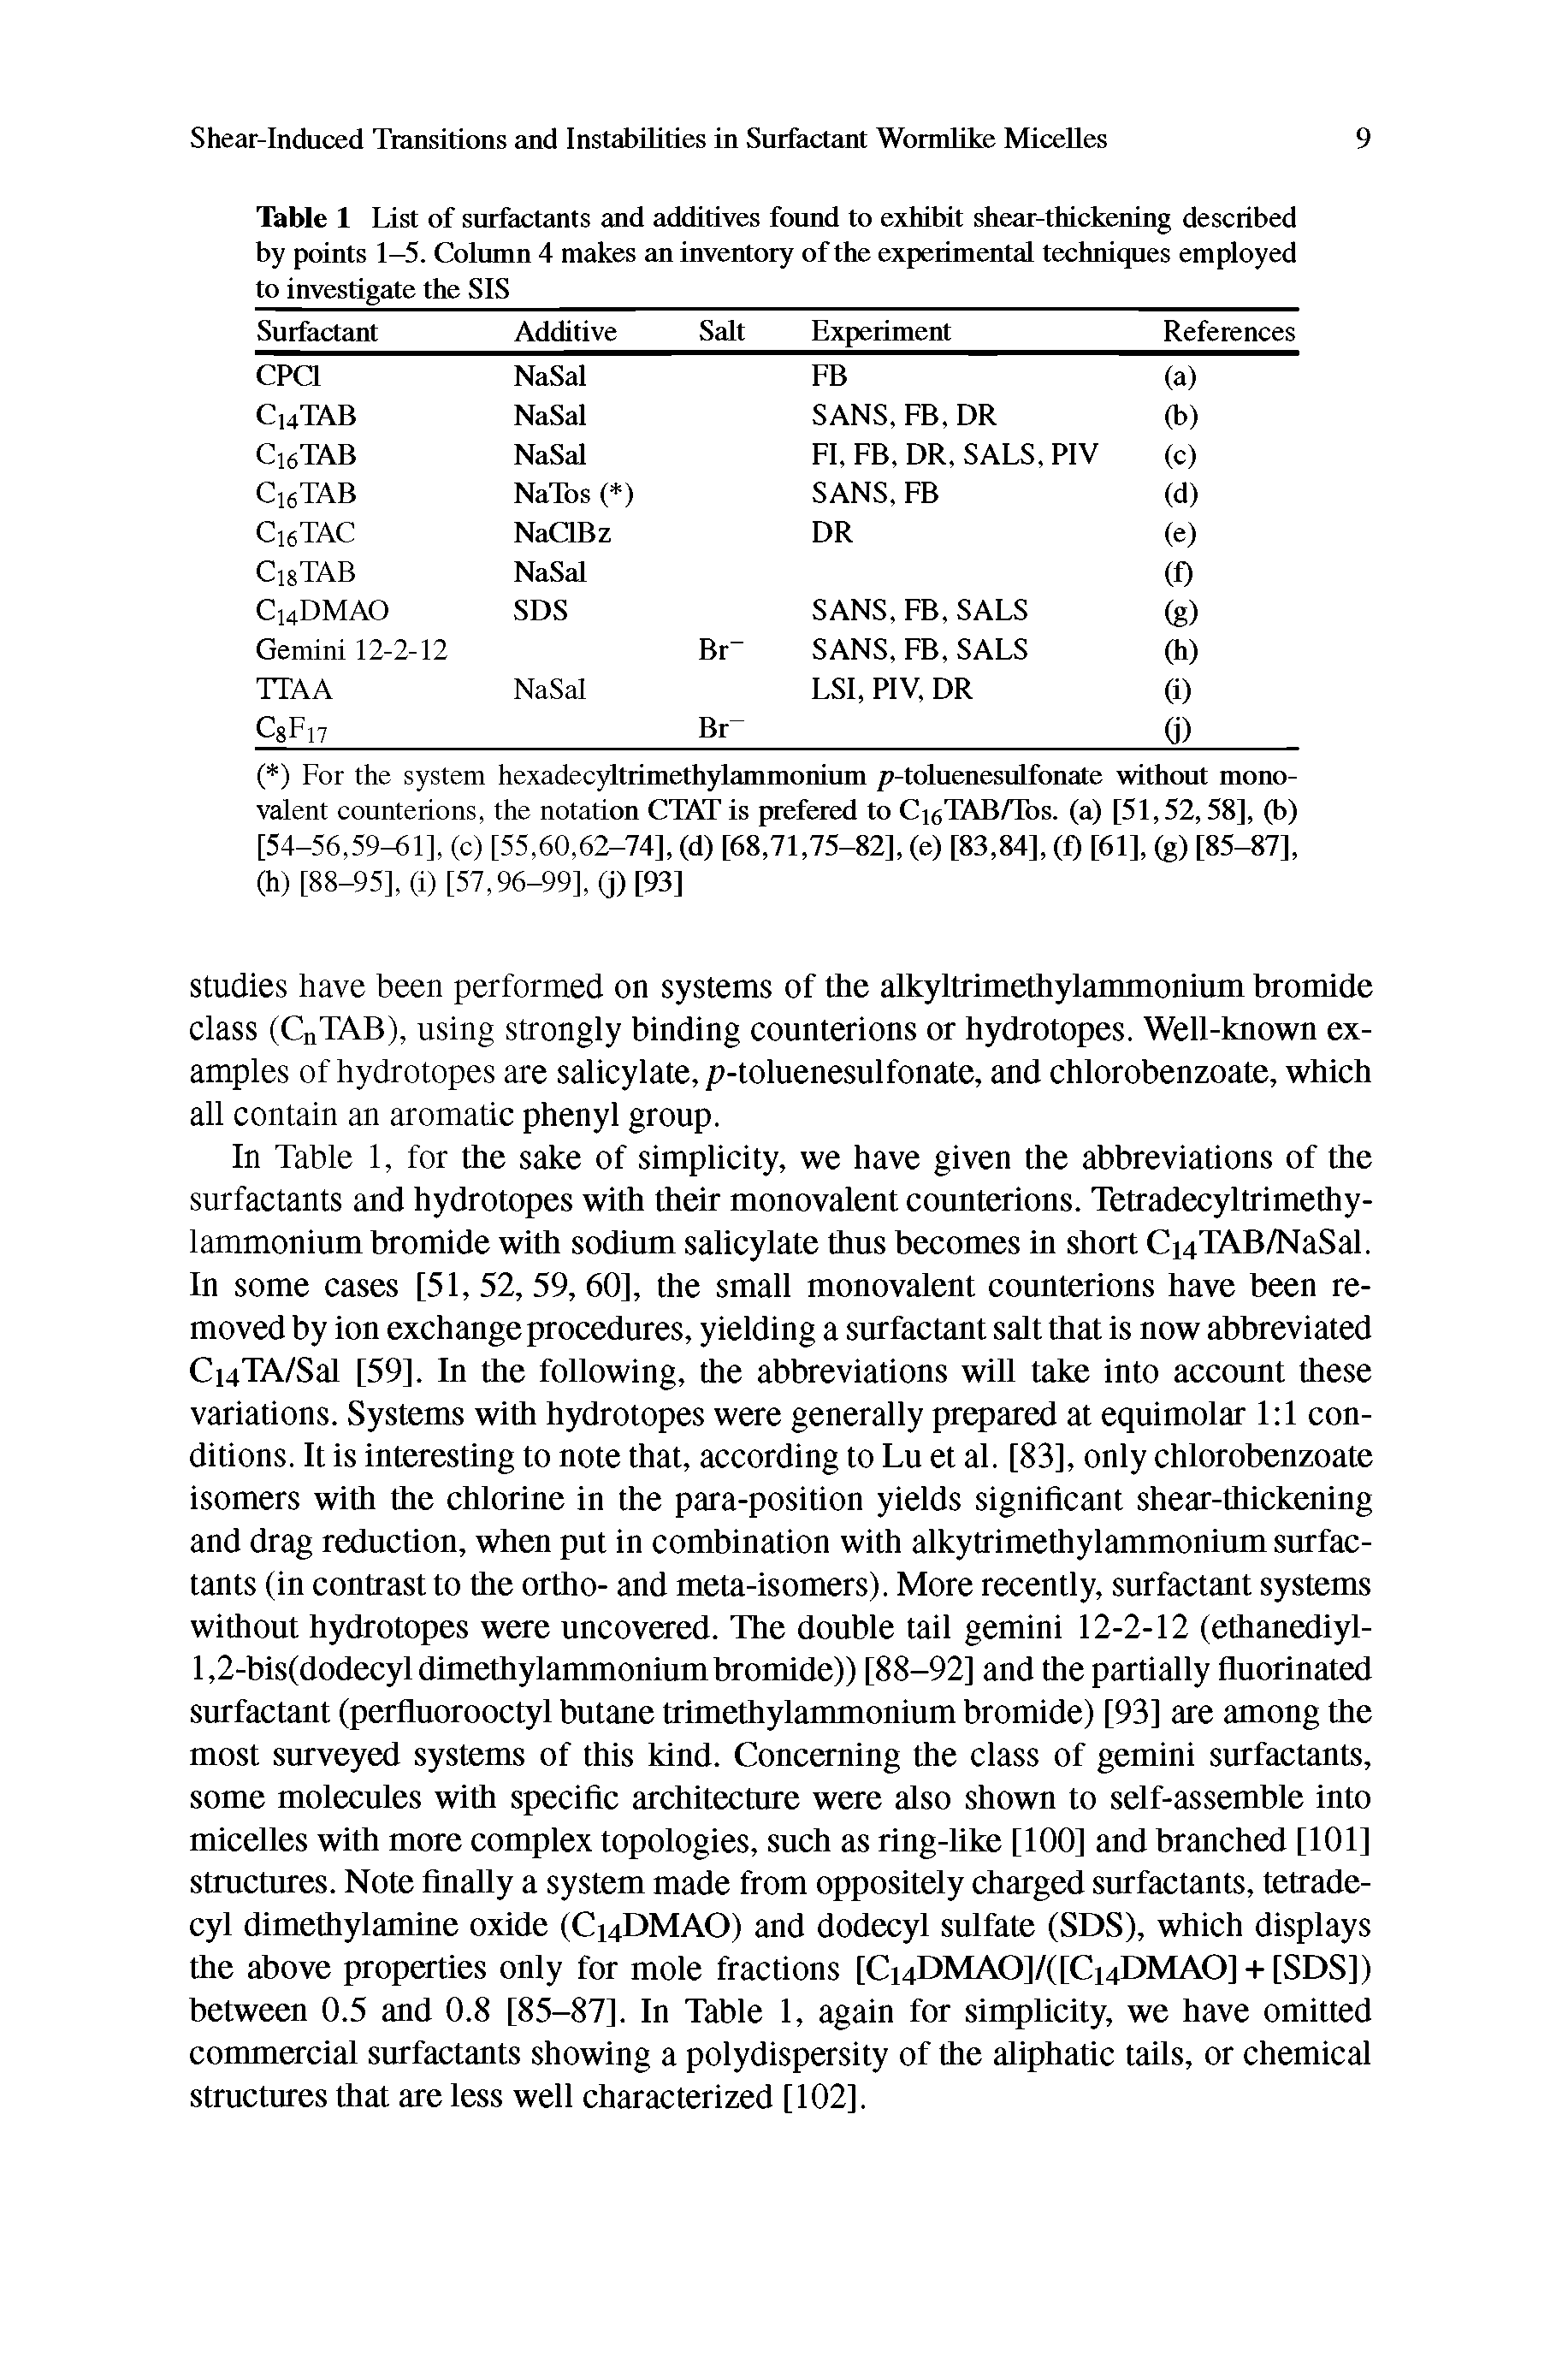 Table 1 List of surfactants and additives found to exhibit shear-thickening described by points 1-5. Column 4 makes an inventory of the experimental techniques employed to investigate the SIS...